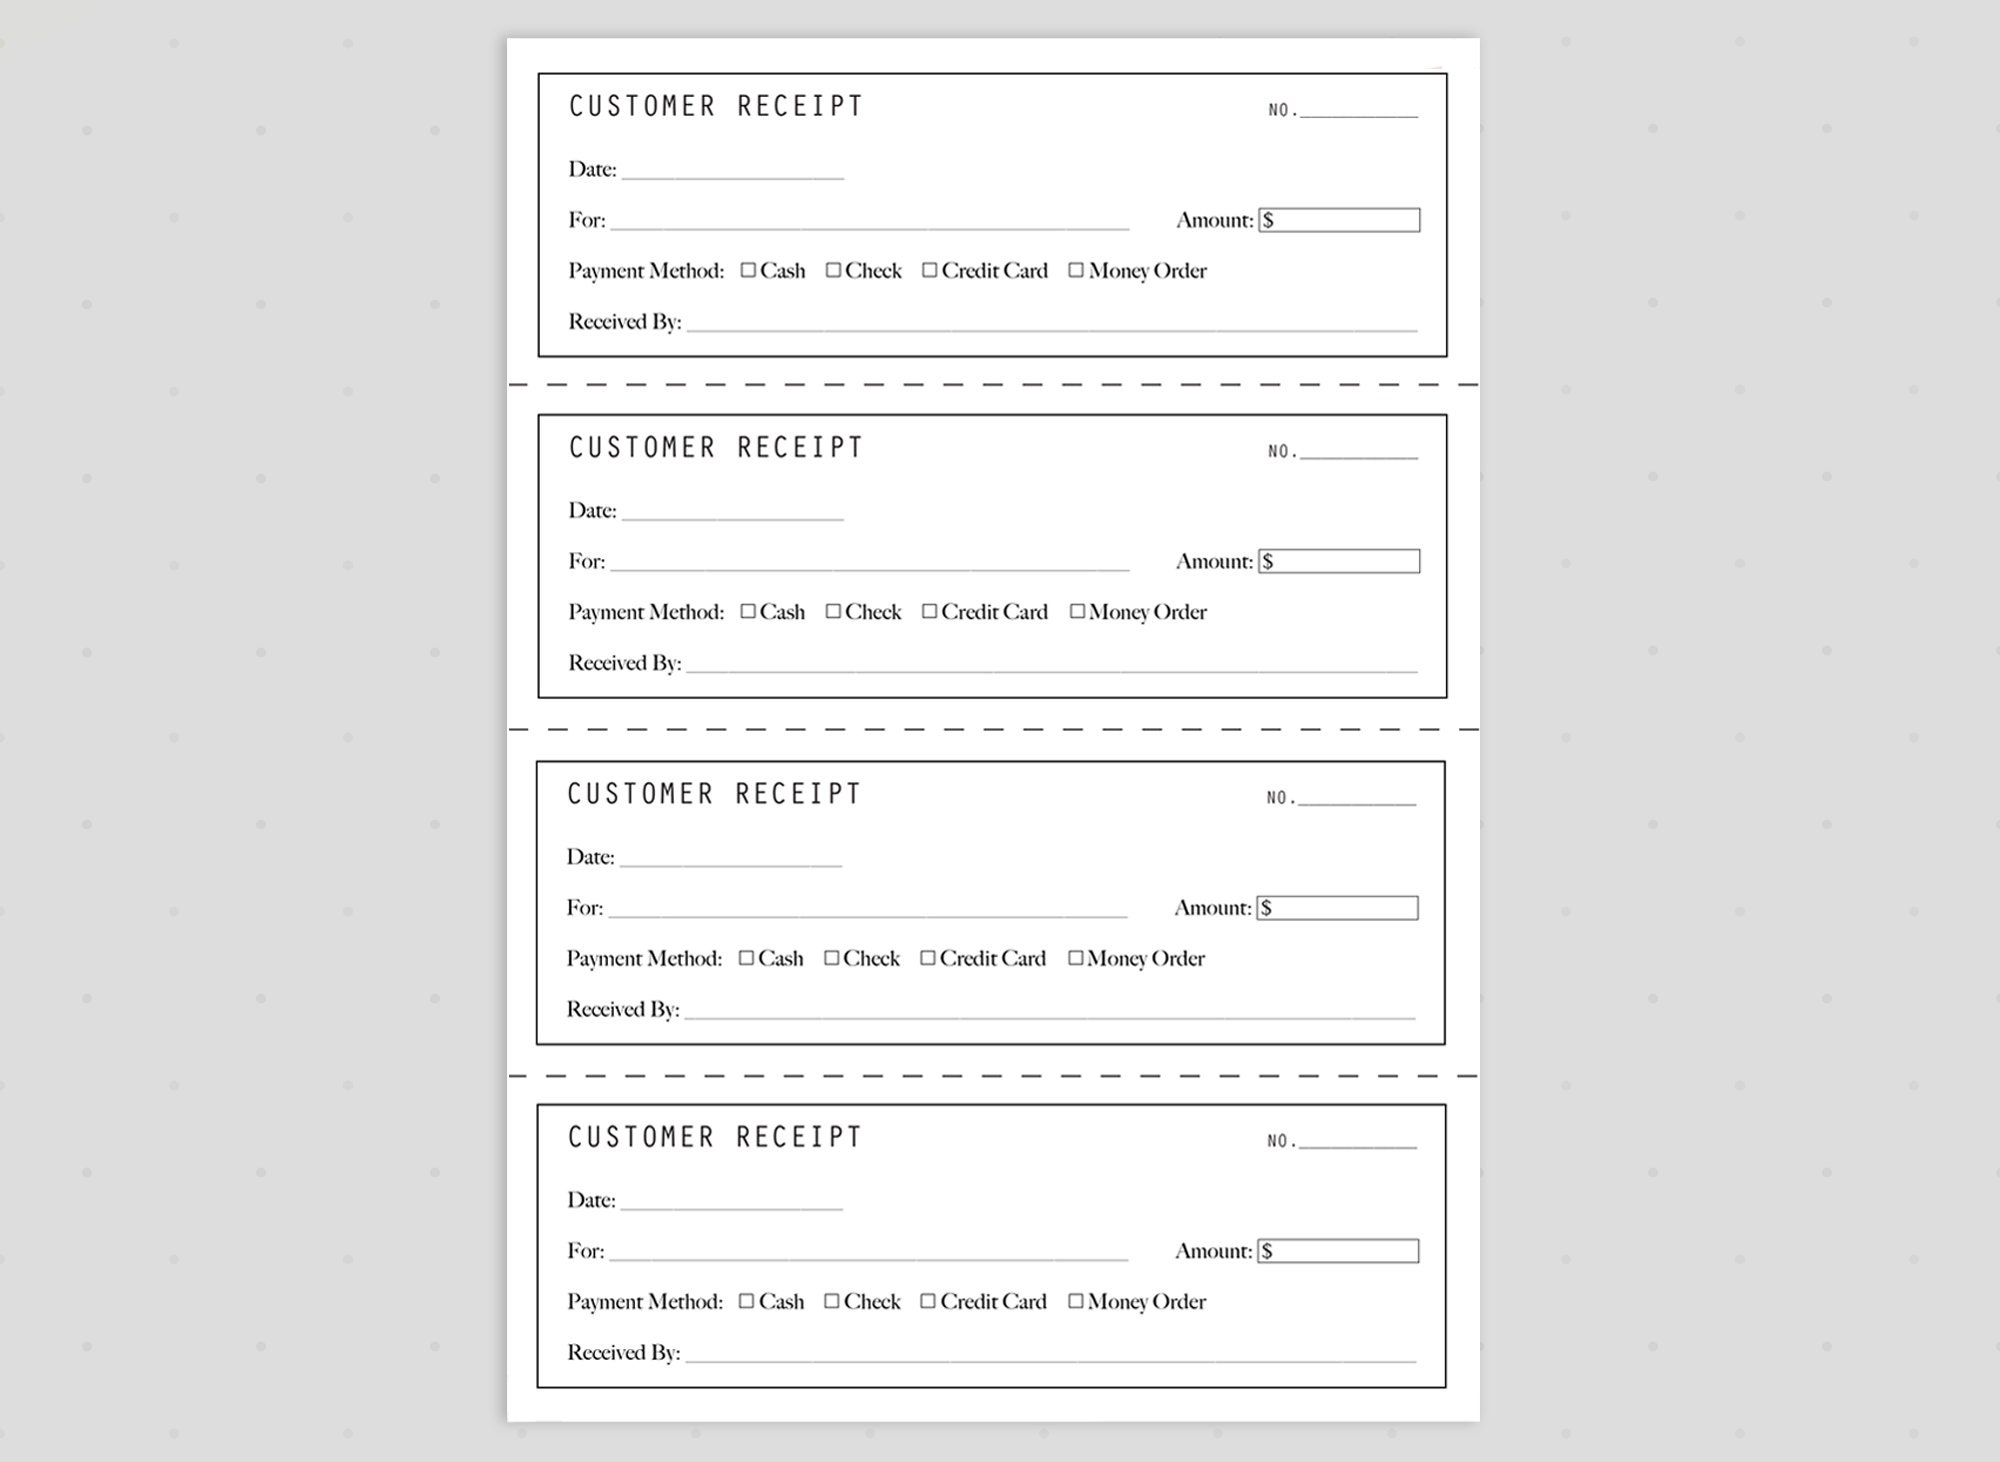 an-invoice-form-is-shown-with-the-company-s-name-and-number-on-it